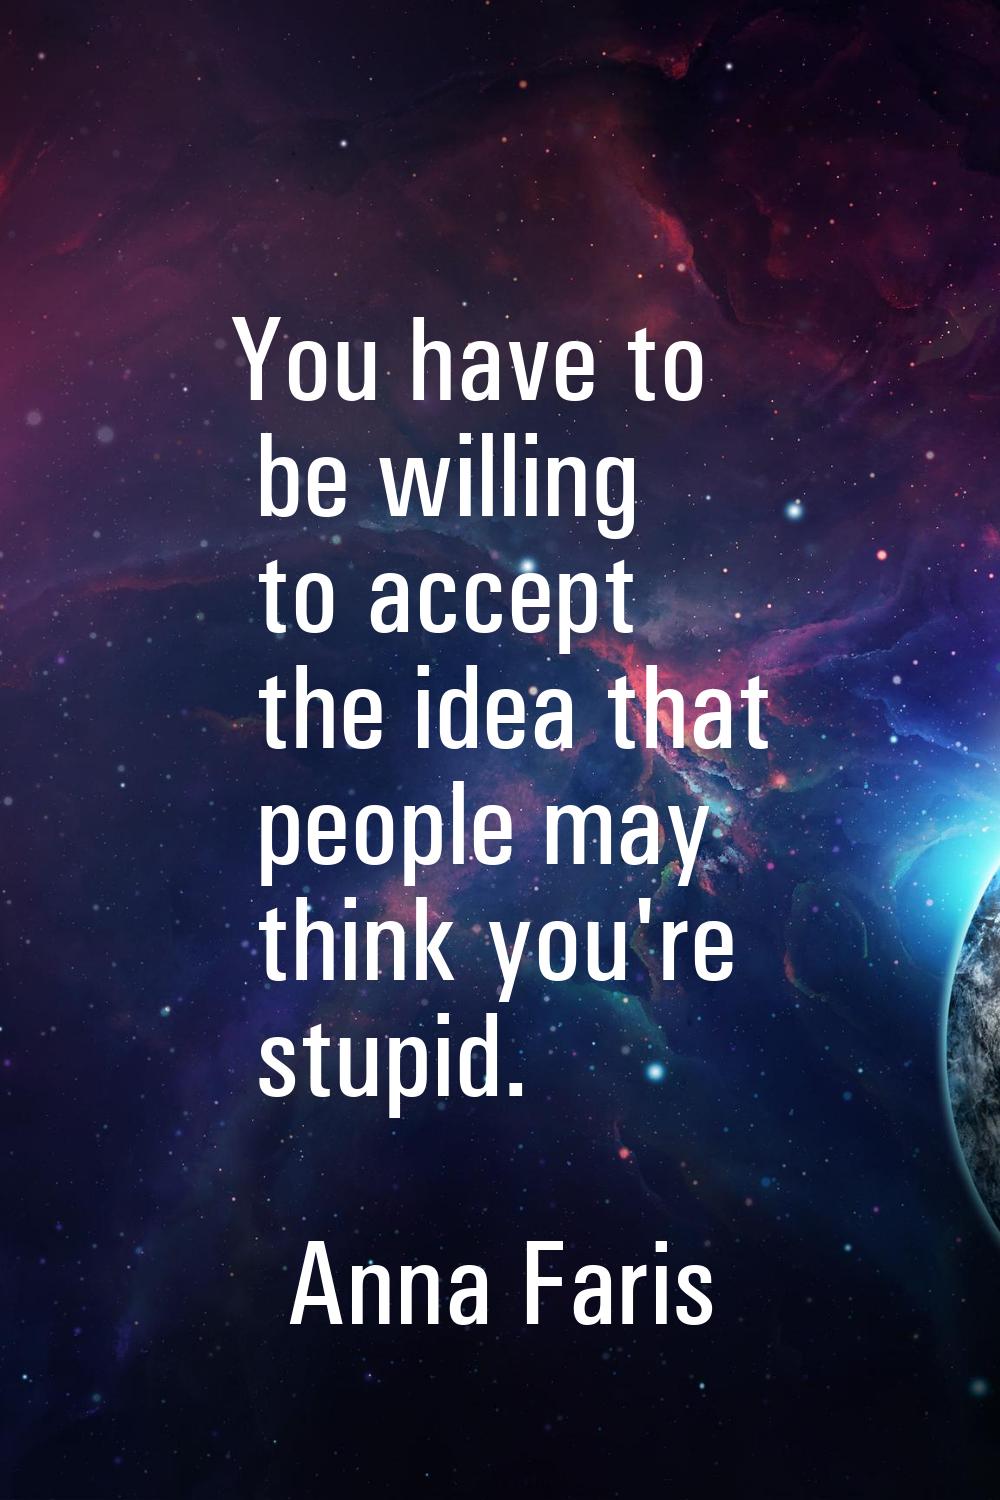 You have to be willing to accept the idea that people may think you're stupid.